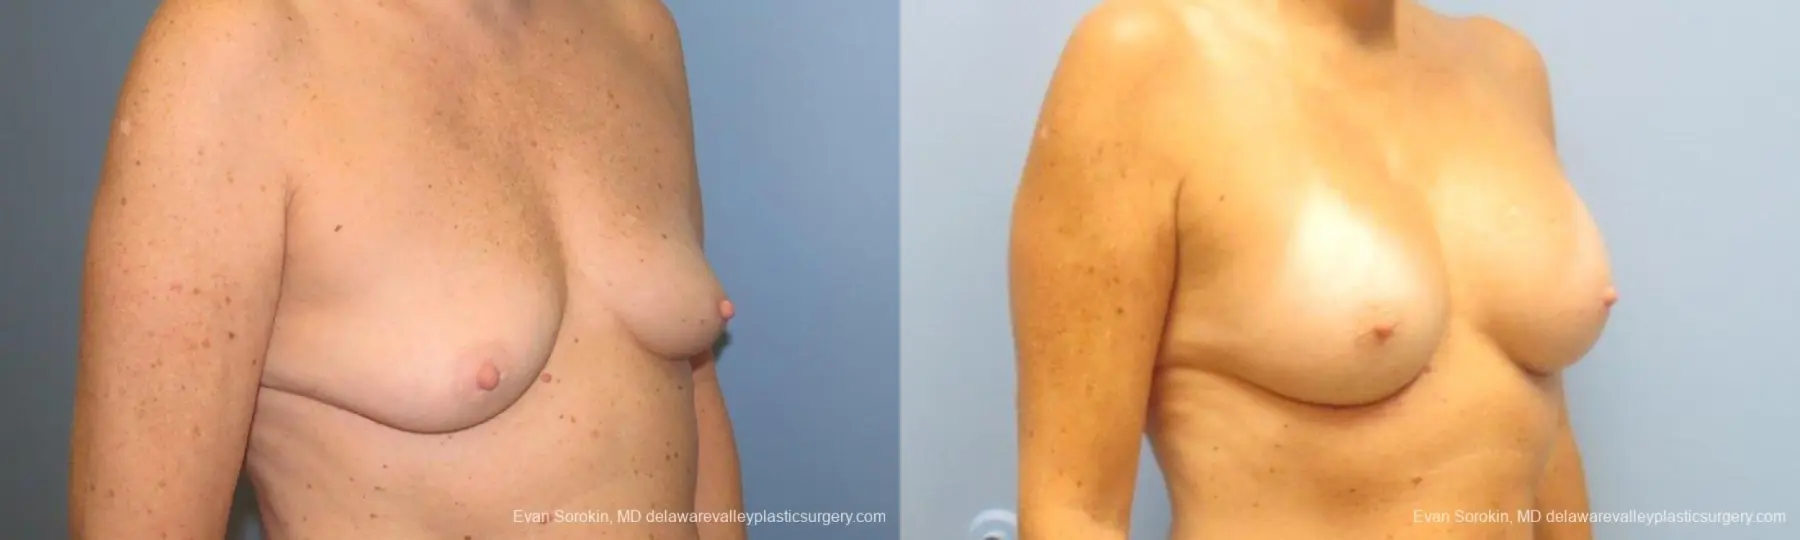 Philadelphia Breast Augmentation 9549 - Before and After 2